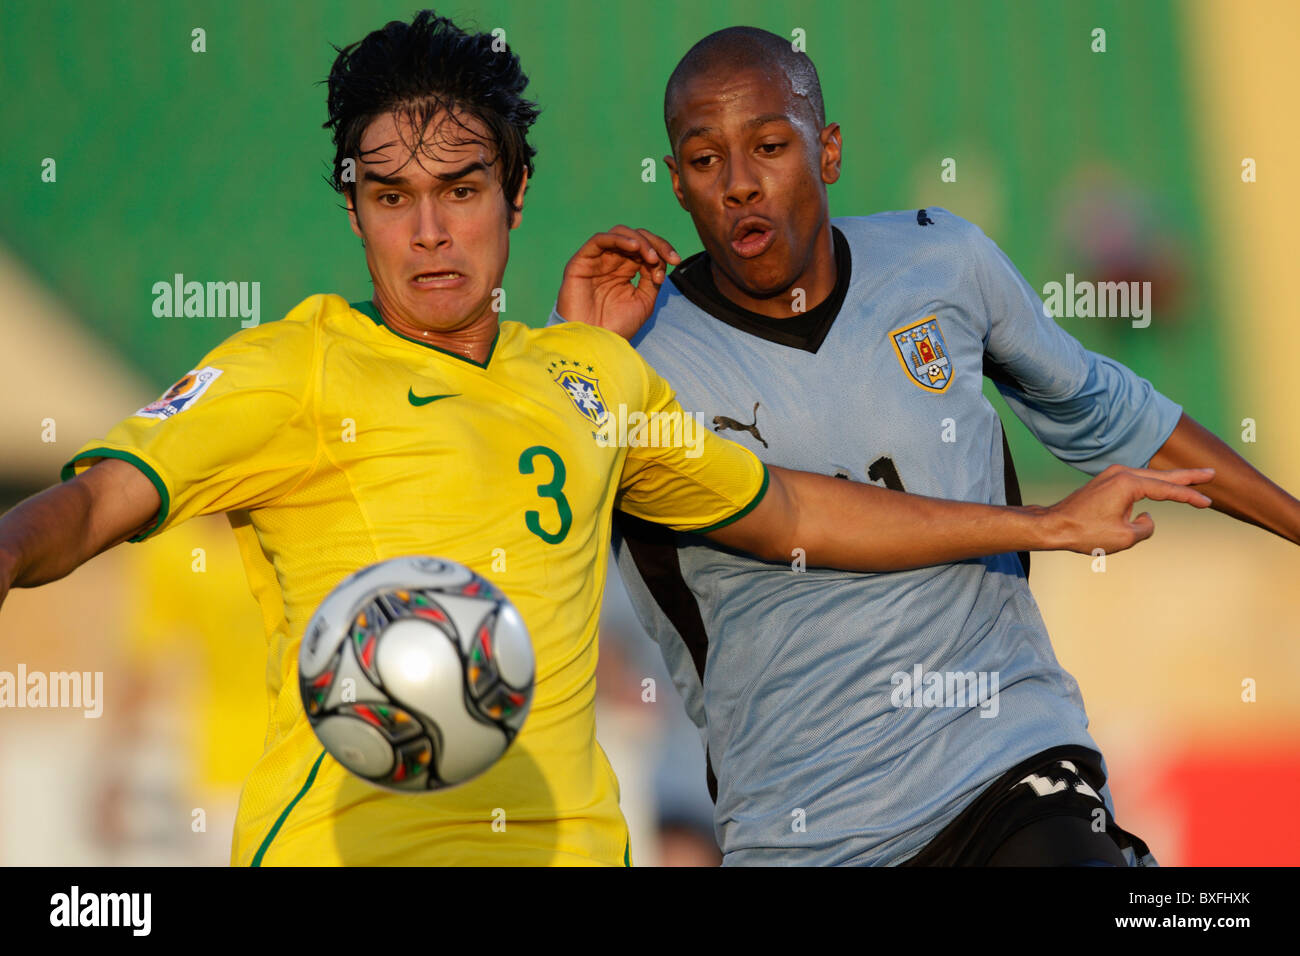 Dalton of Brazil (l) and Abel Hernandez of Uruguay (r) eye the ball during a 2009 FIFA U-20 World Cup round of 16 soccer match. Stock Photo